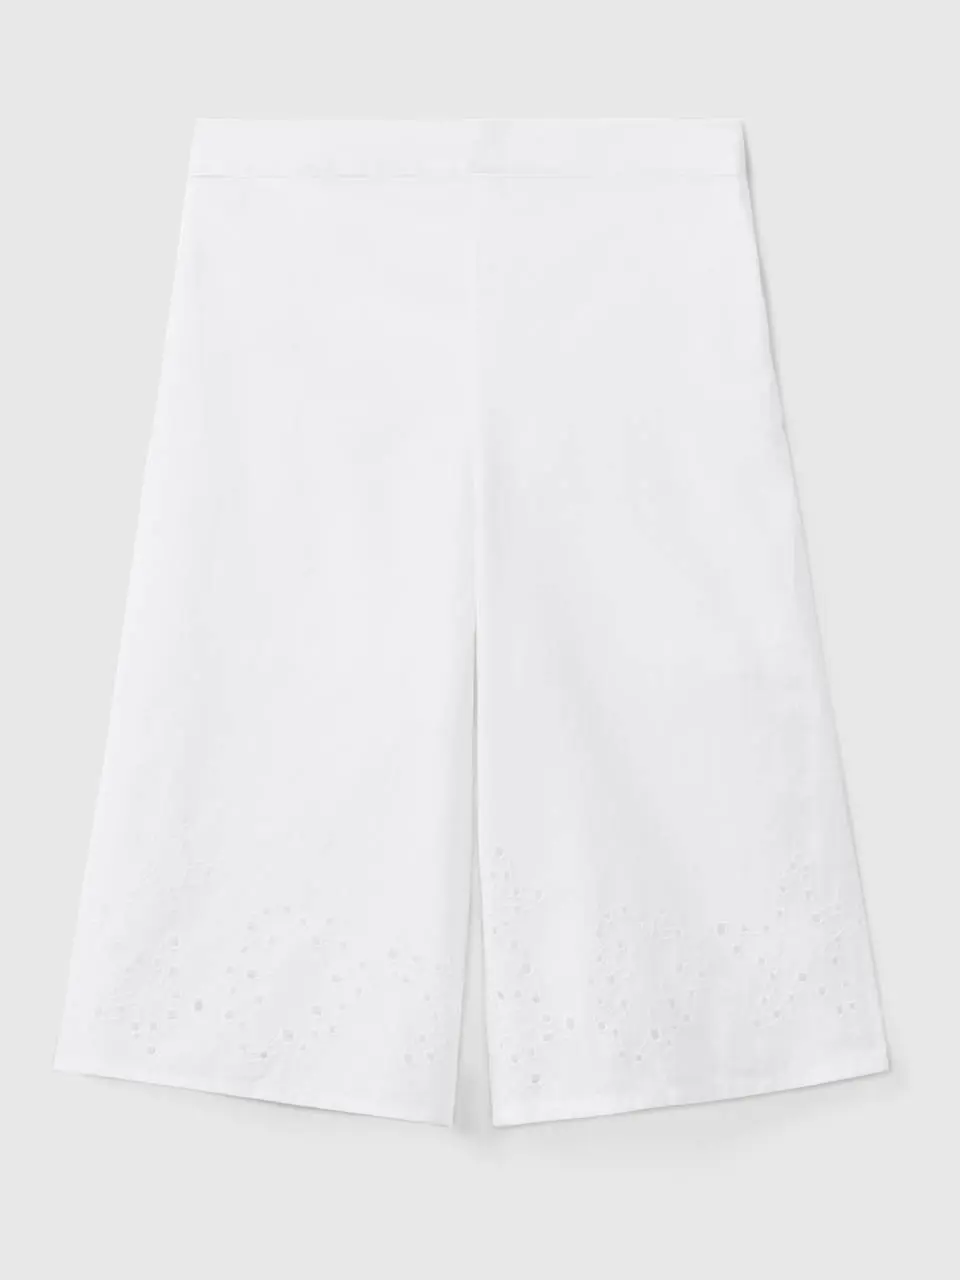 Benetton bermudas with embroidery. 1